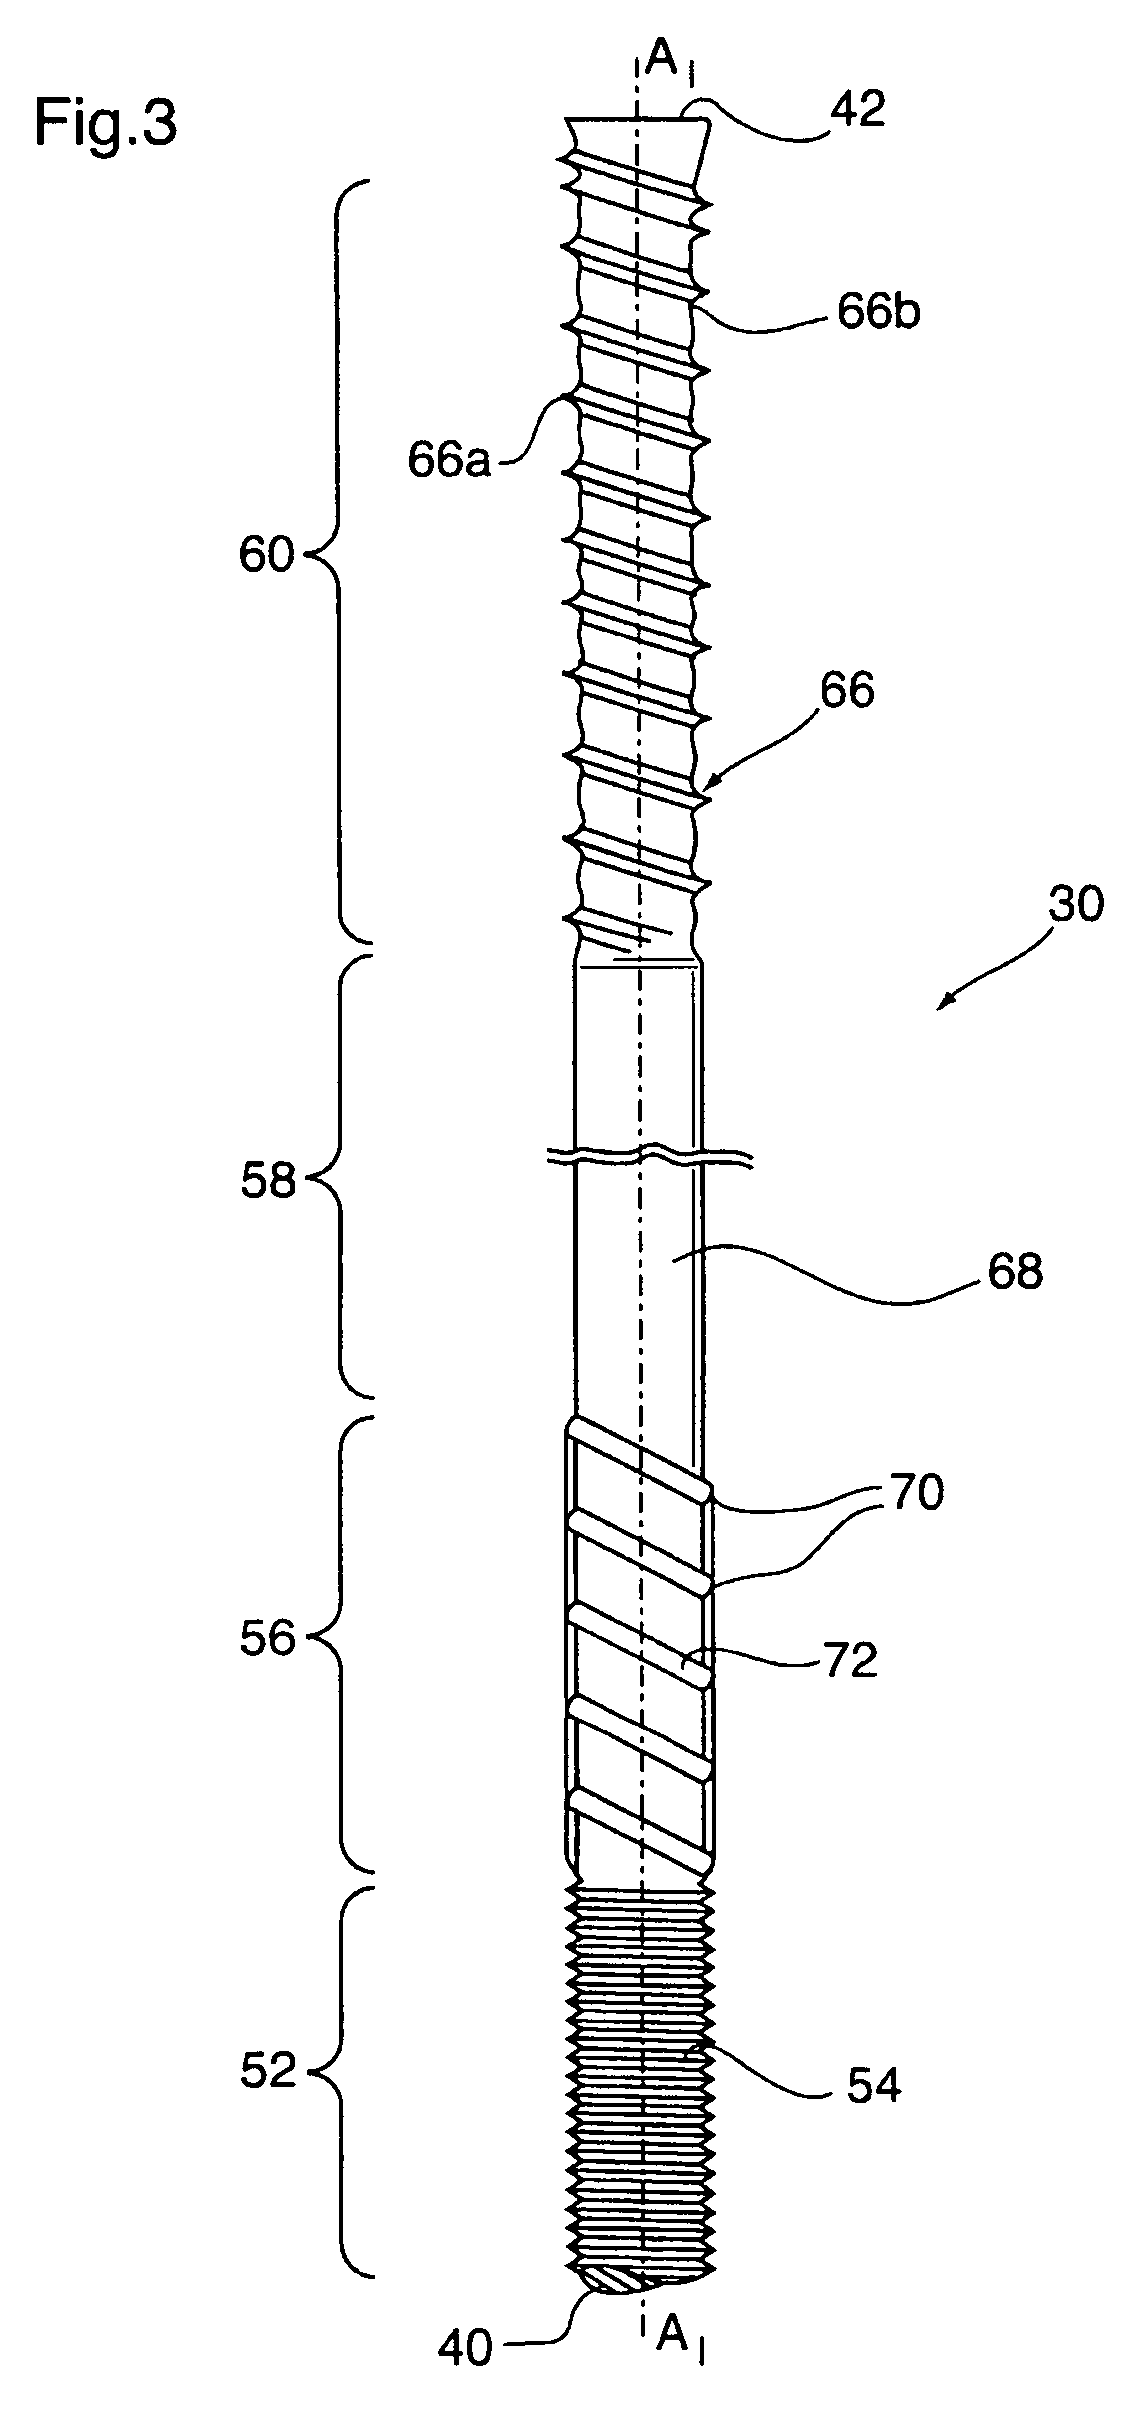 Anchor tendon with selectively deformable portions